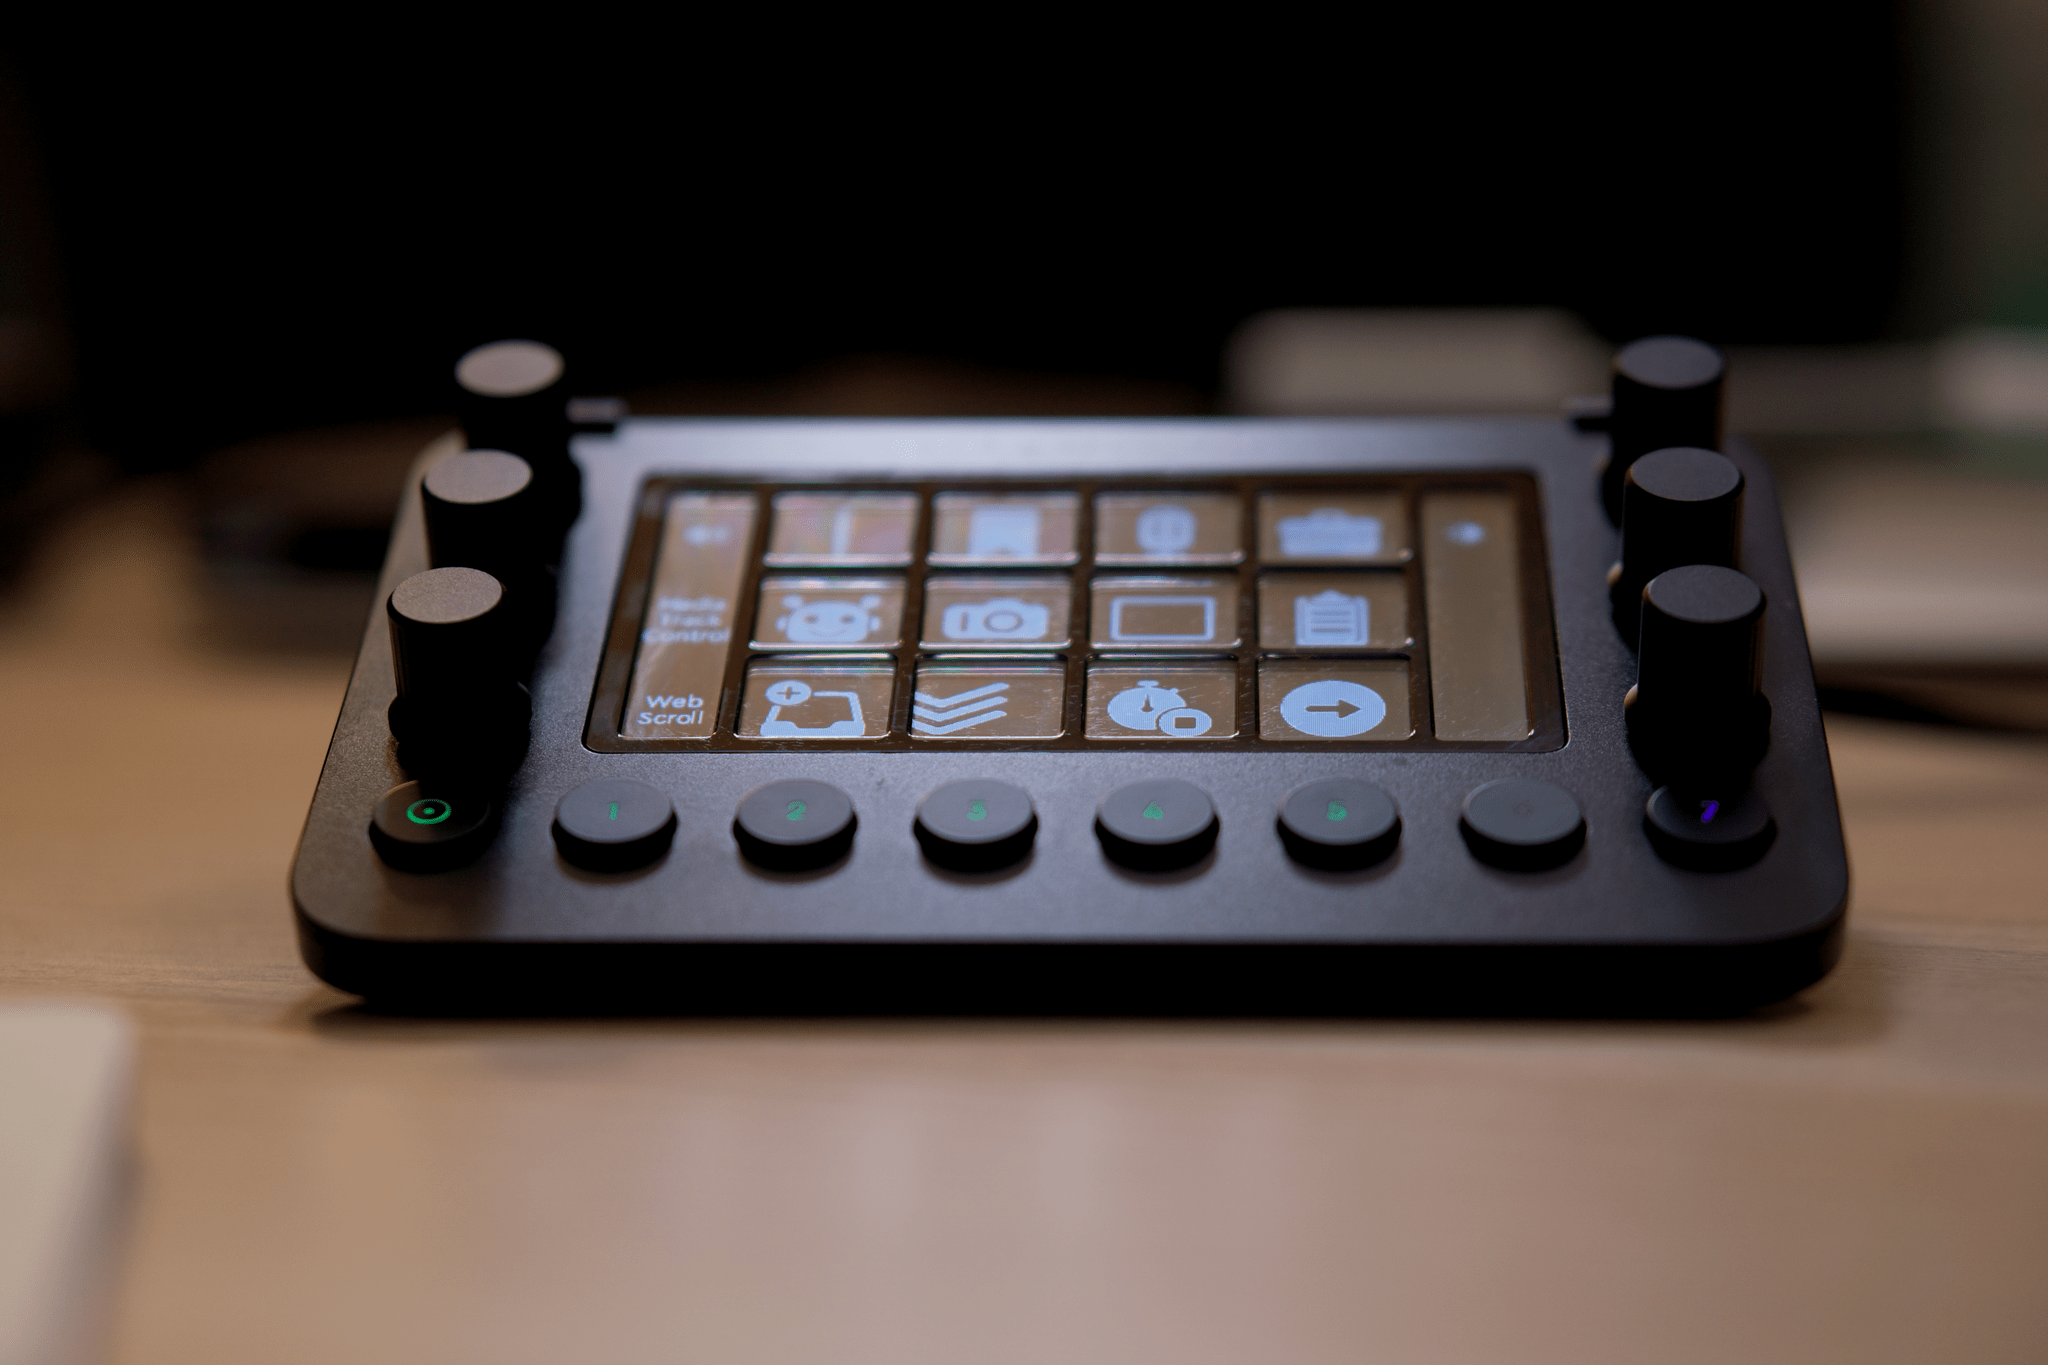 The Loupedeck Live photographs better than the Stream Deck for a reason – it's nicer.